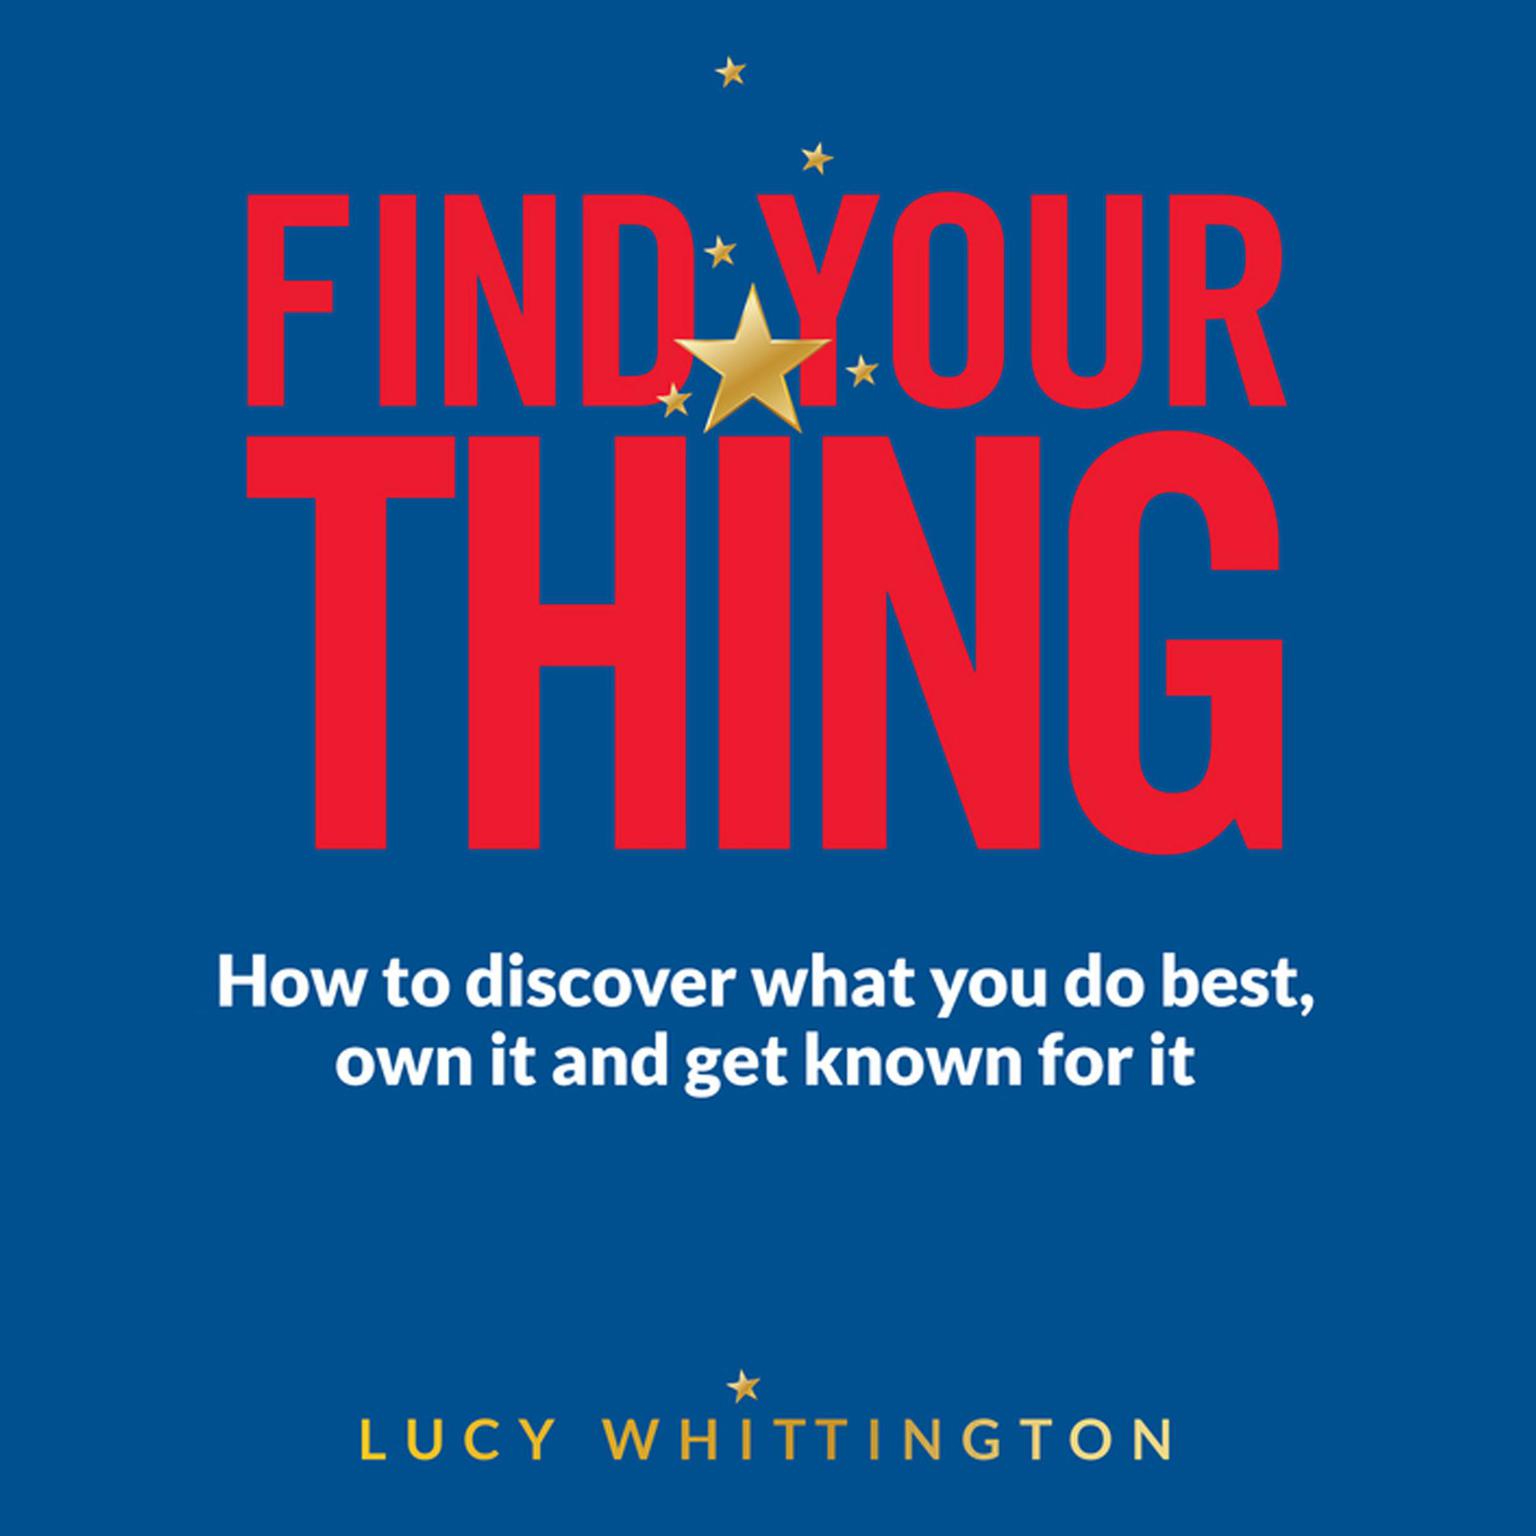 Find Your Thing: How to Discover What You Do Best, Own It and Get Known for It Audiobook, by Lucy Whittington